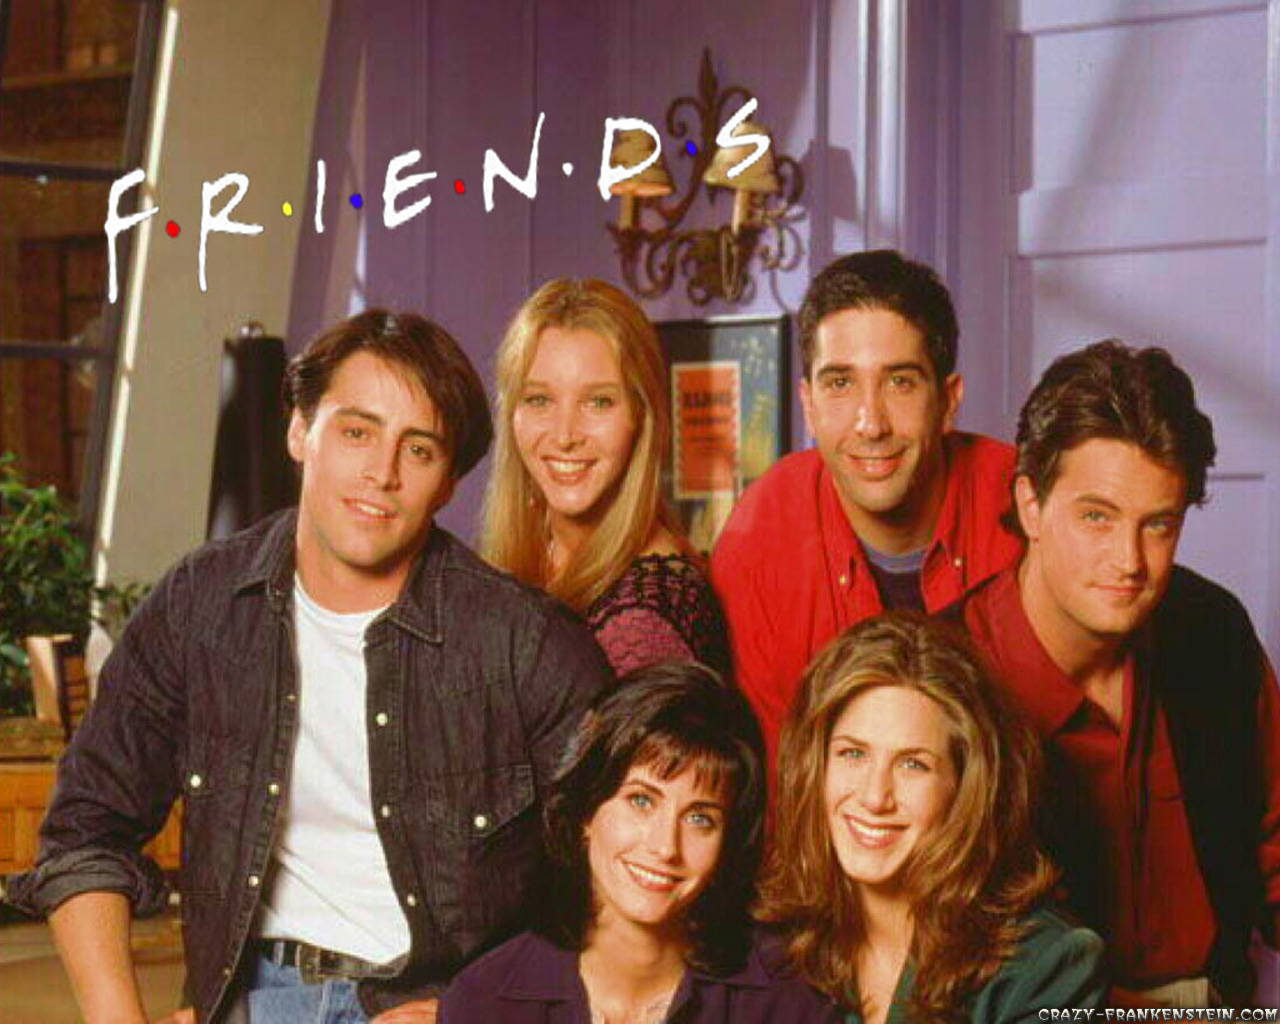 🔥 Free Download Friends Tv Series Wallpapers 1280x1024 Friends Central Tv Show [1280x1024